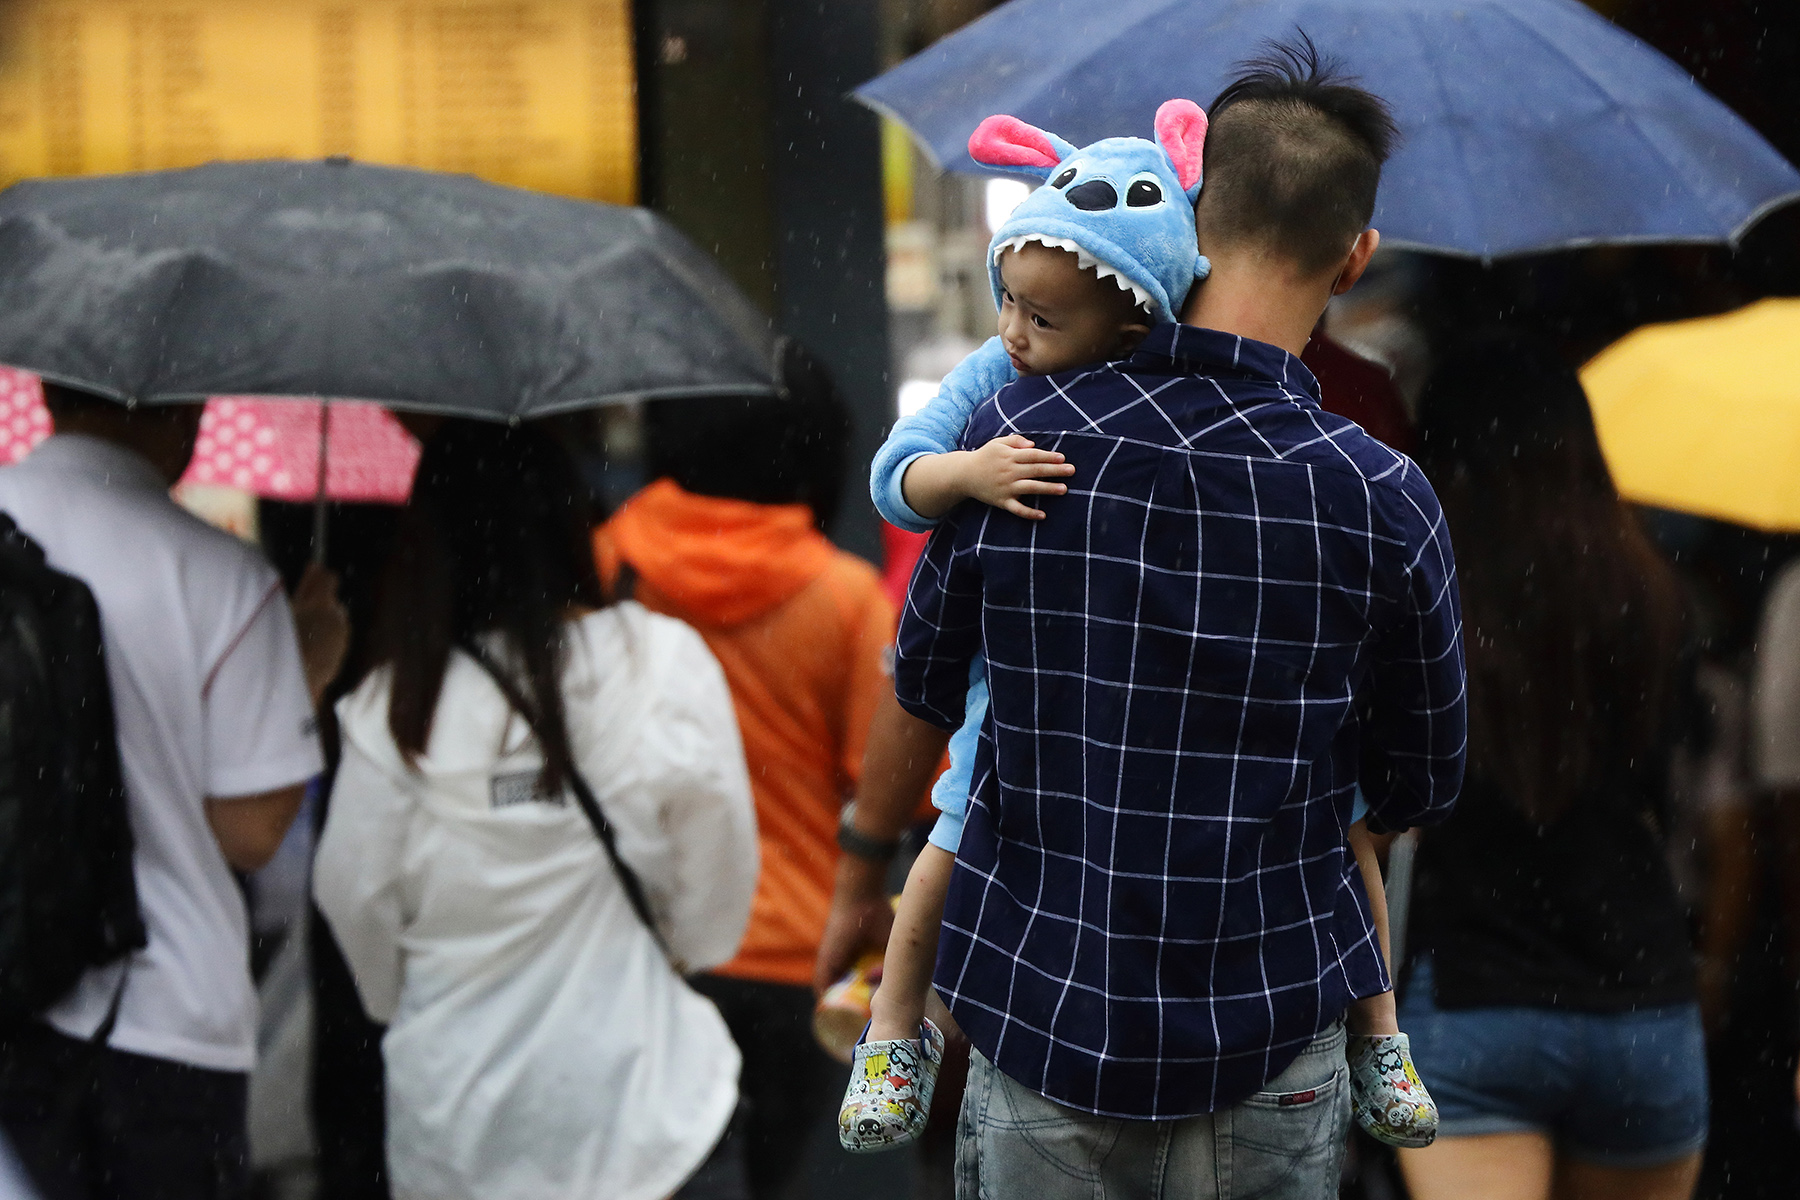 From behind, a dad carrying his child who is wearing a blue onesie - it is raining, other people have umbrellas, she can join him in Singapore on a Dependent Pass

